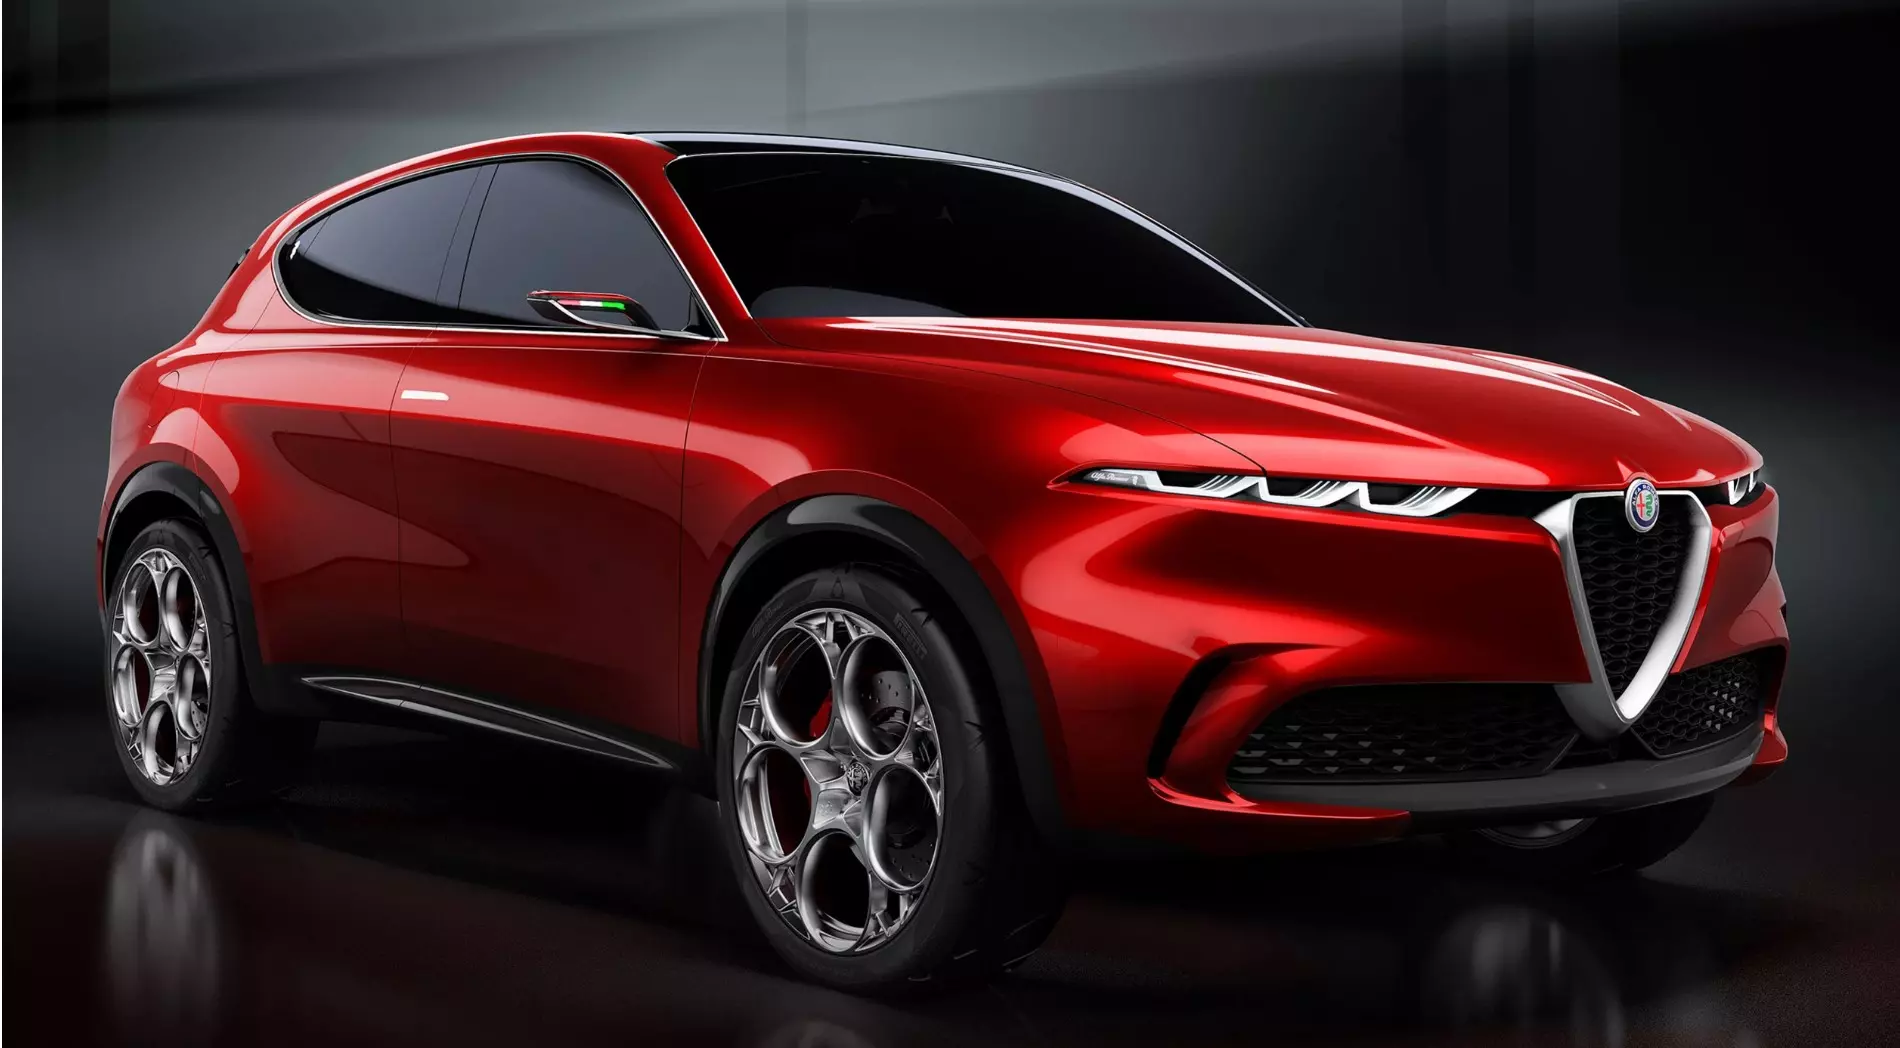 Here is the final version of the Alfa Romeo Tonale